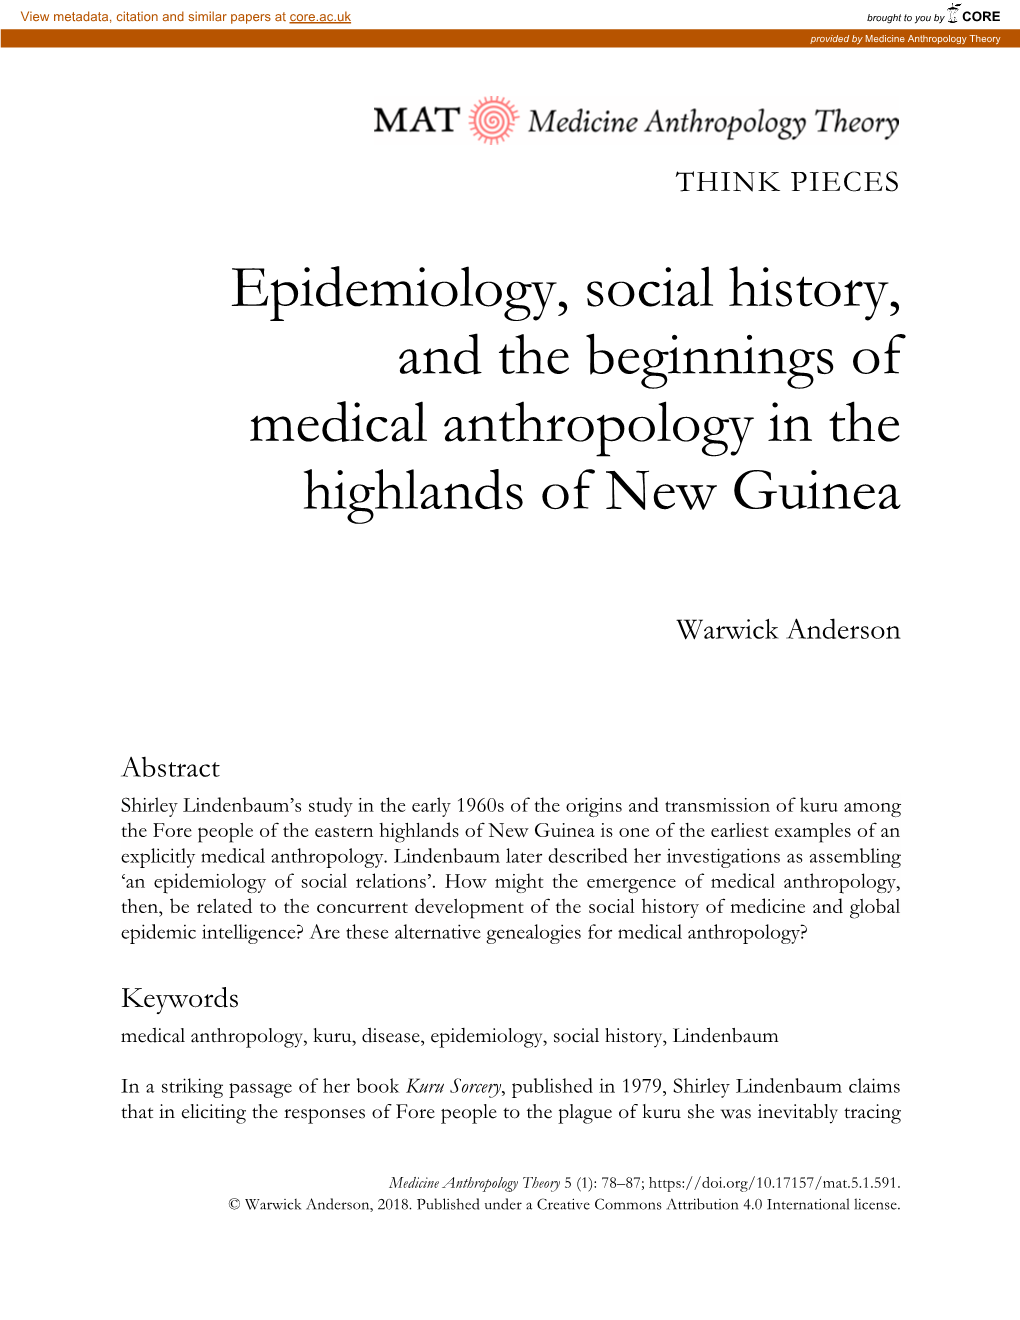 Epidemiology, Social History, and the Beginnings of Medical Anthropology in the Highlands of New Guinea